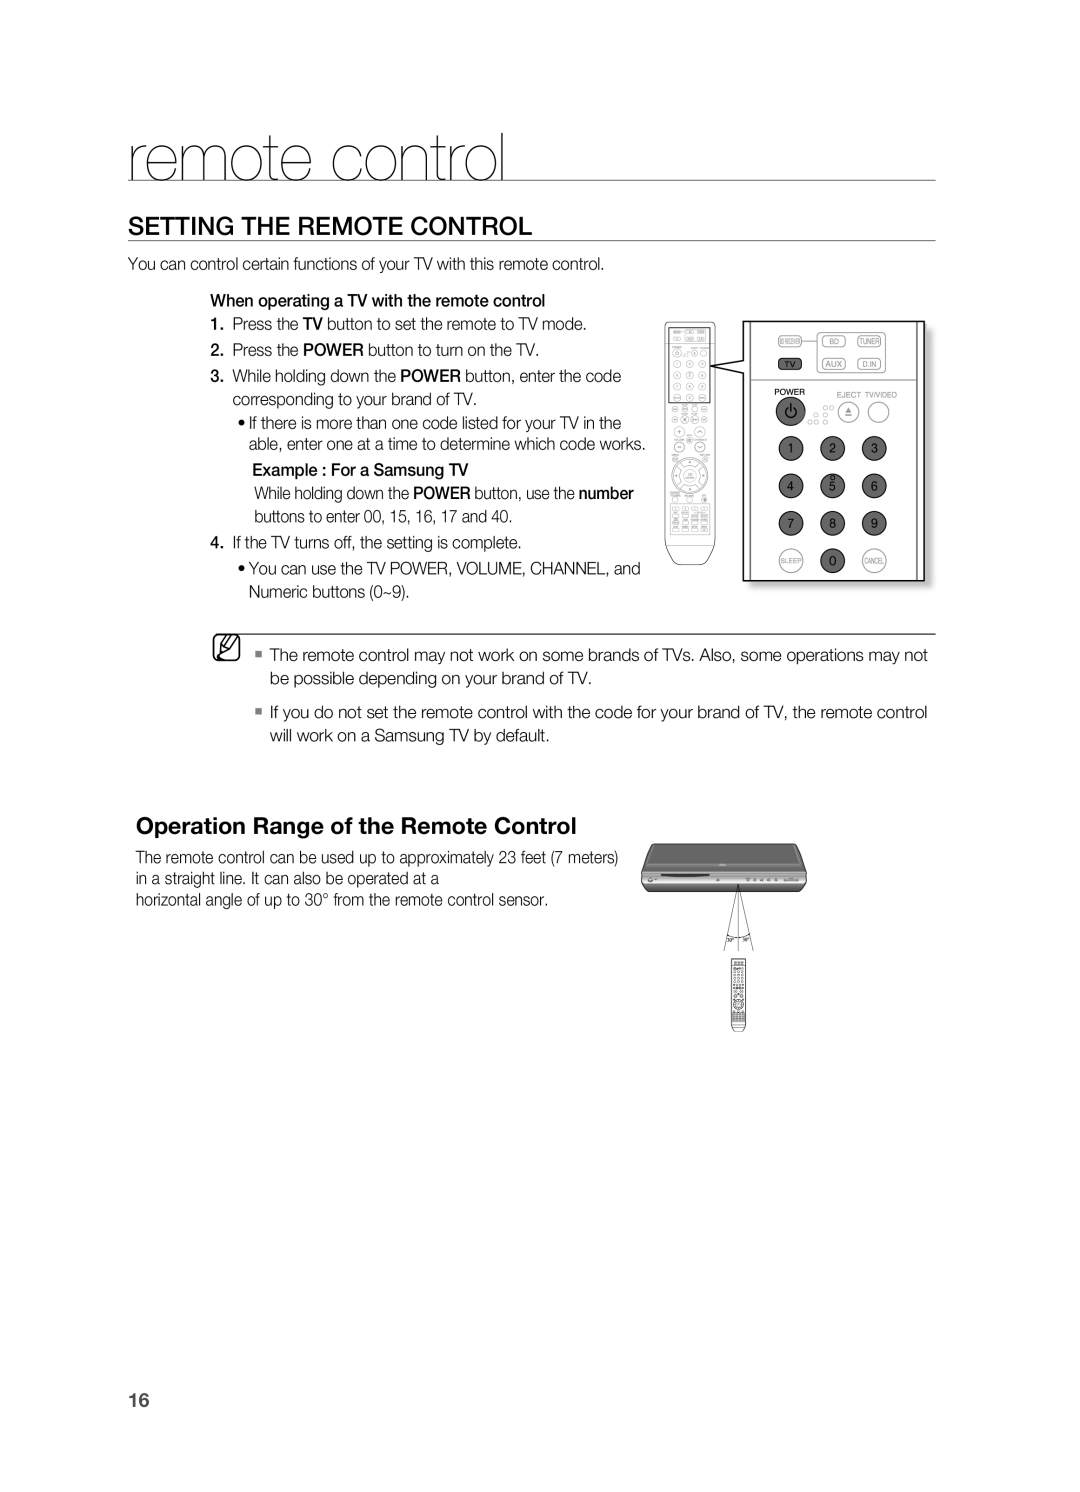 Samsung HT-BD2S manual SETTIng THE REMOTE COnTROL, Operation Range of the Remote Control, remote control 